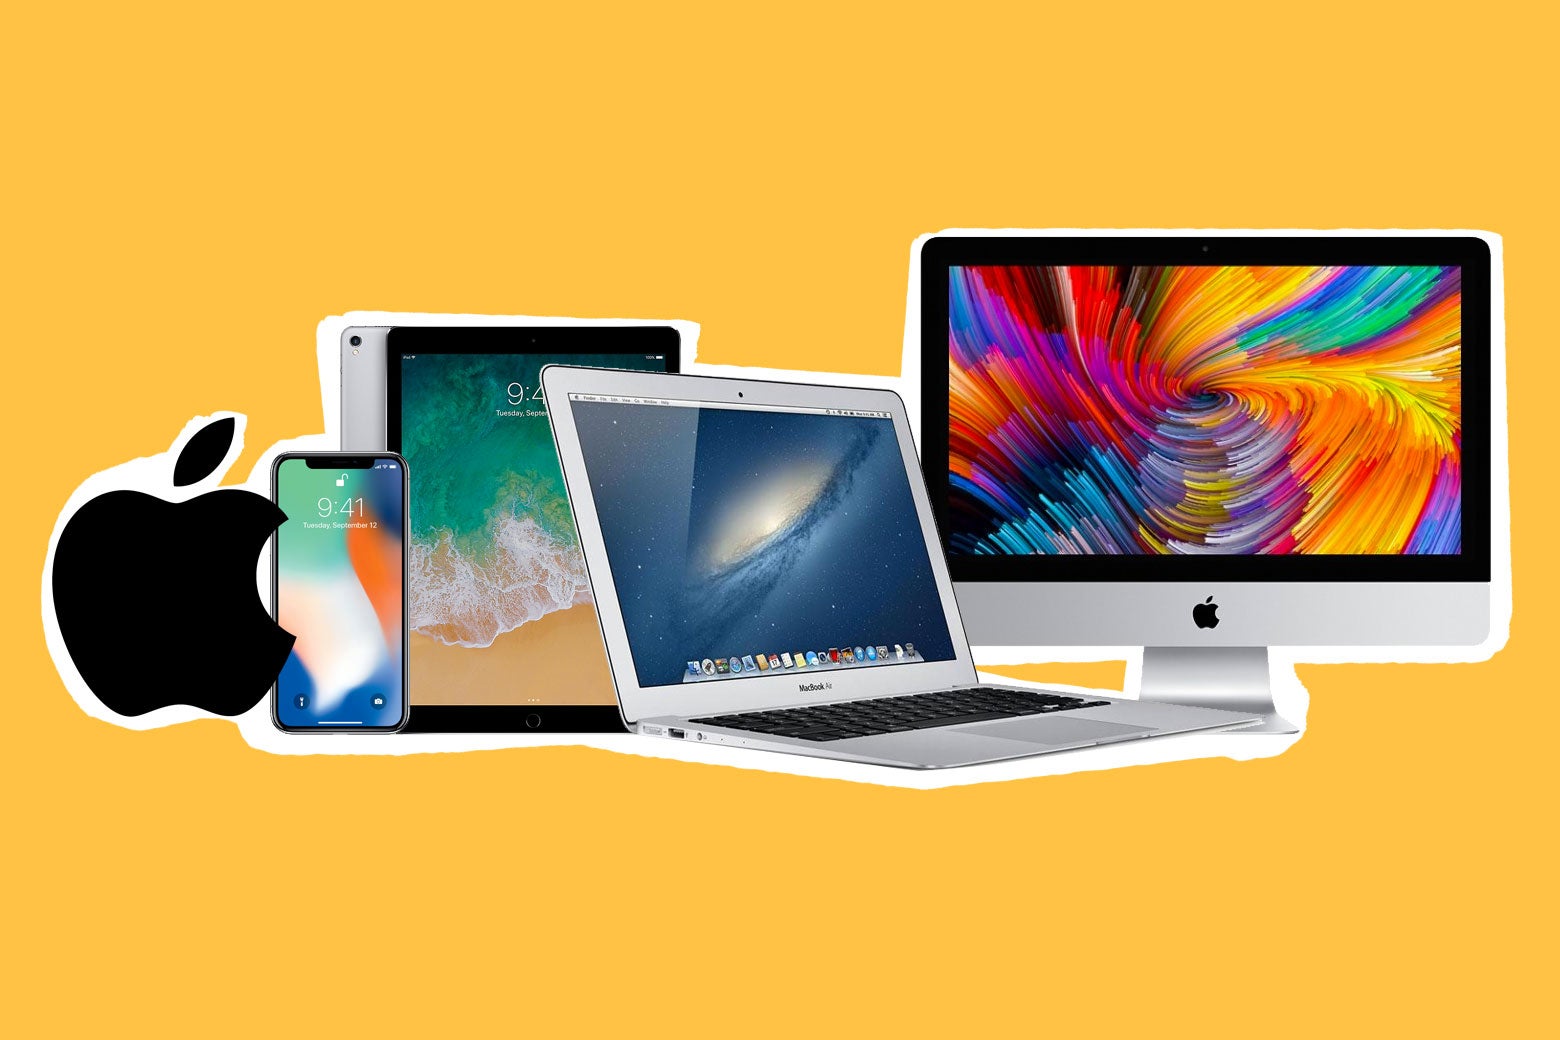 A collage of Apple products, including the iPhone, iMac, iPod, and Macbook Air.